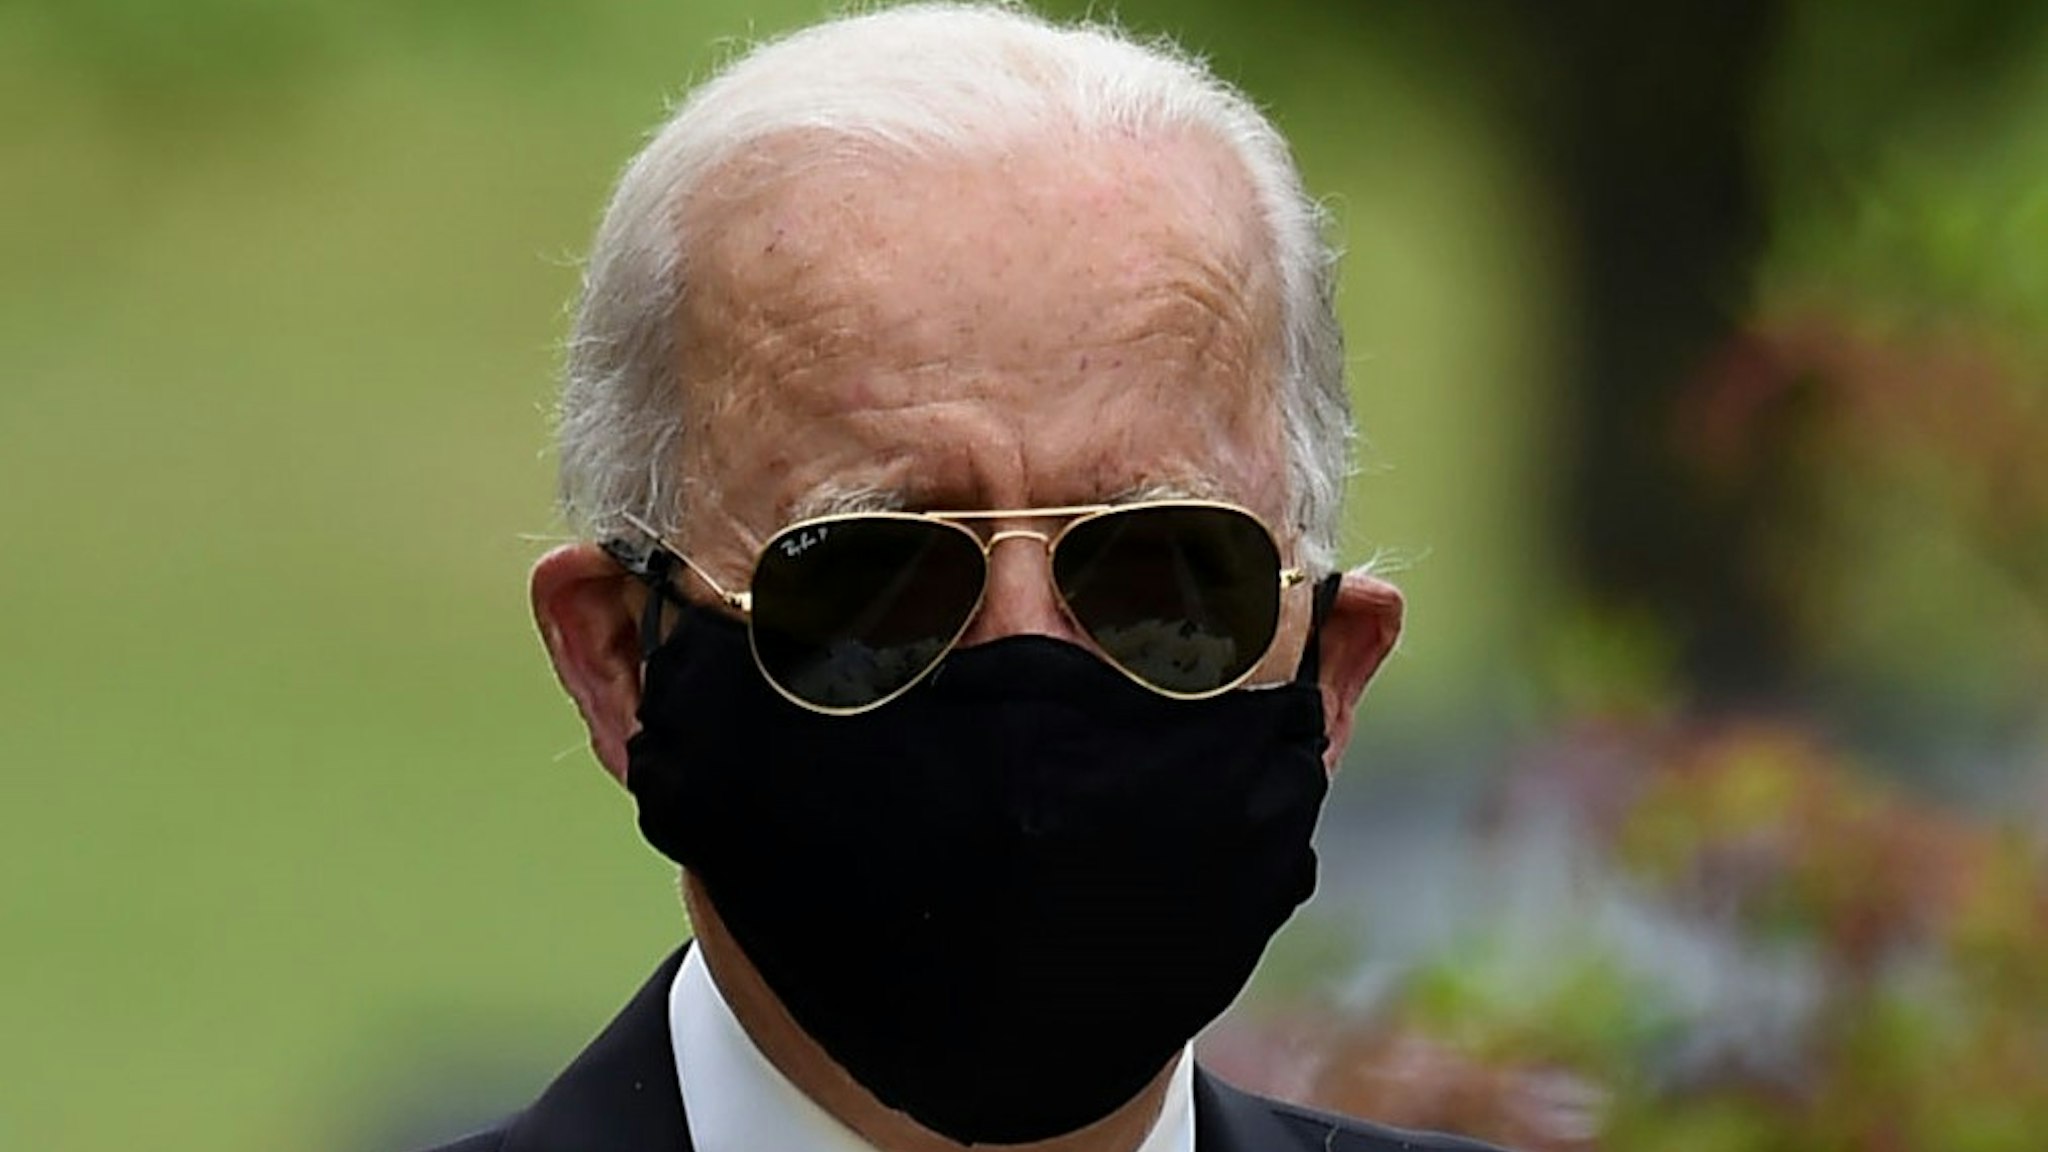 TOPSHOT - Democratic presidential candidate and former US Vice President Joe Biden arrives to pay his respects to fallen service members on Memorial Day at Delaware Memorial Bridge Veteran's Memorial Park in Newcastle, Delaware, May 25, 2020. (Photo by Olivier DOULIERY / AFP) (Photo by